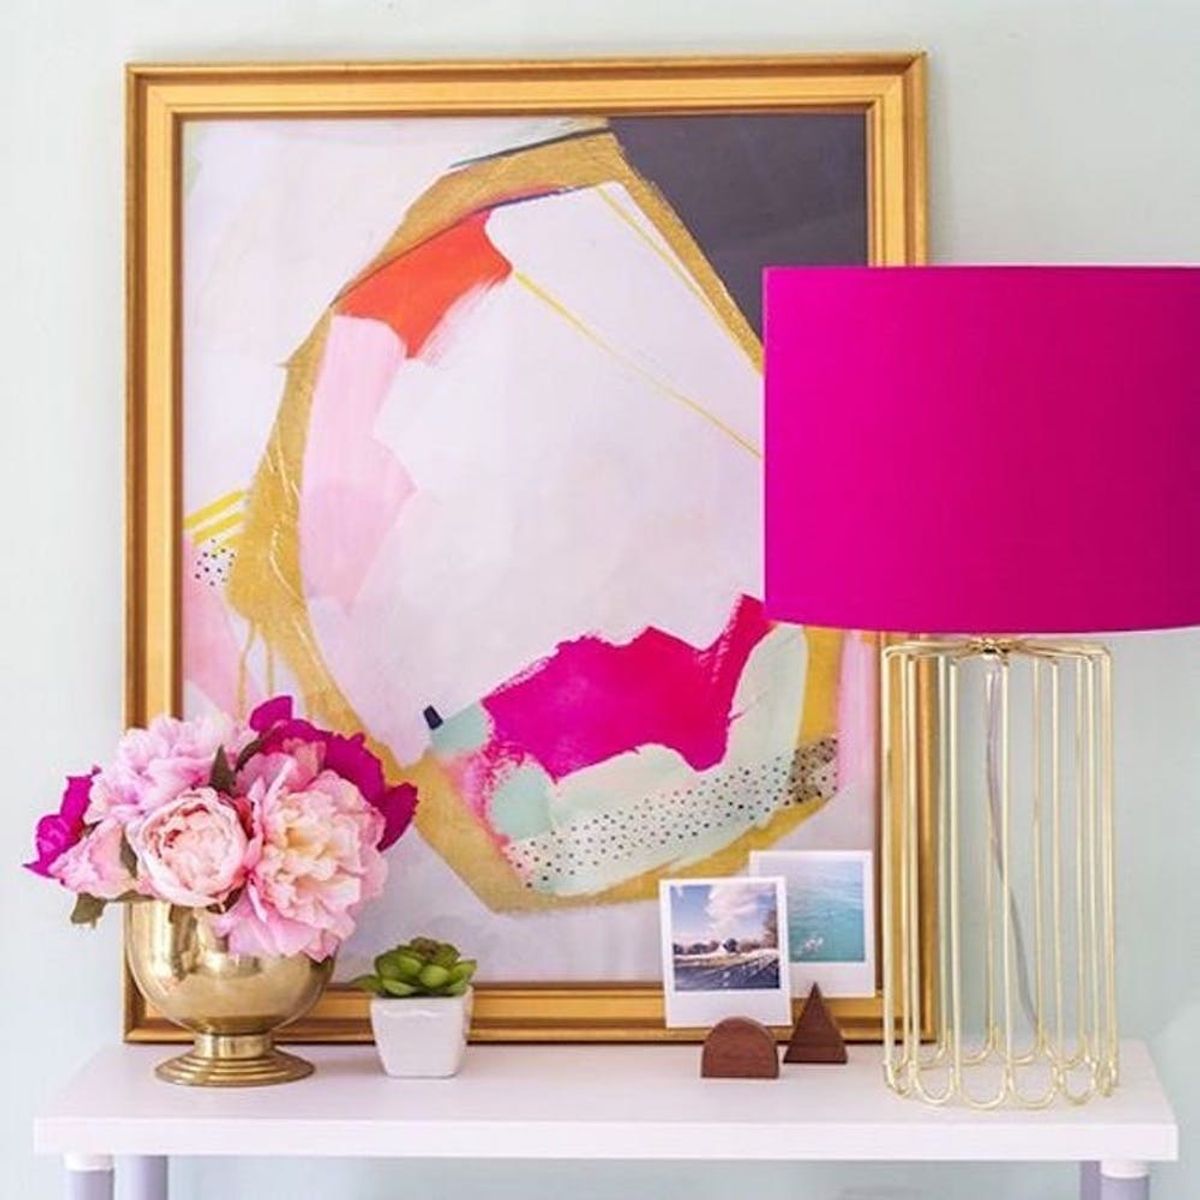 It’s Official: These Are the Hottest Decor Trends on Pinterest